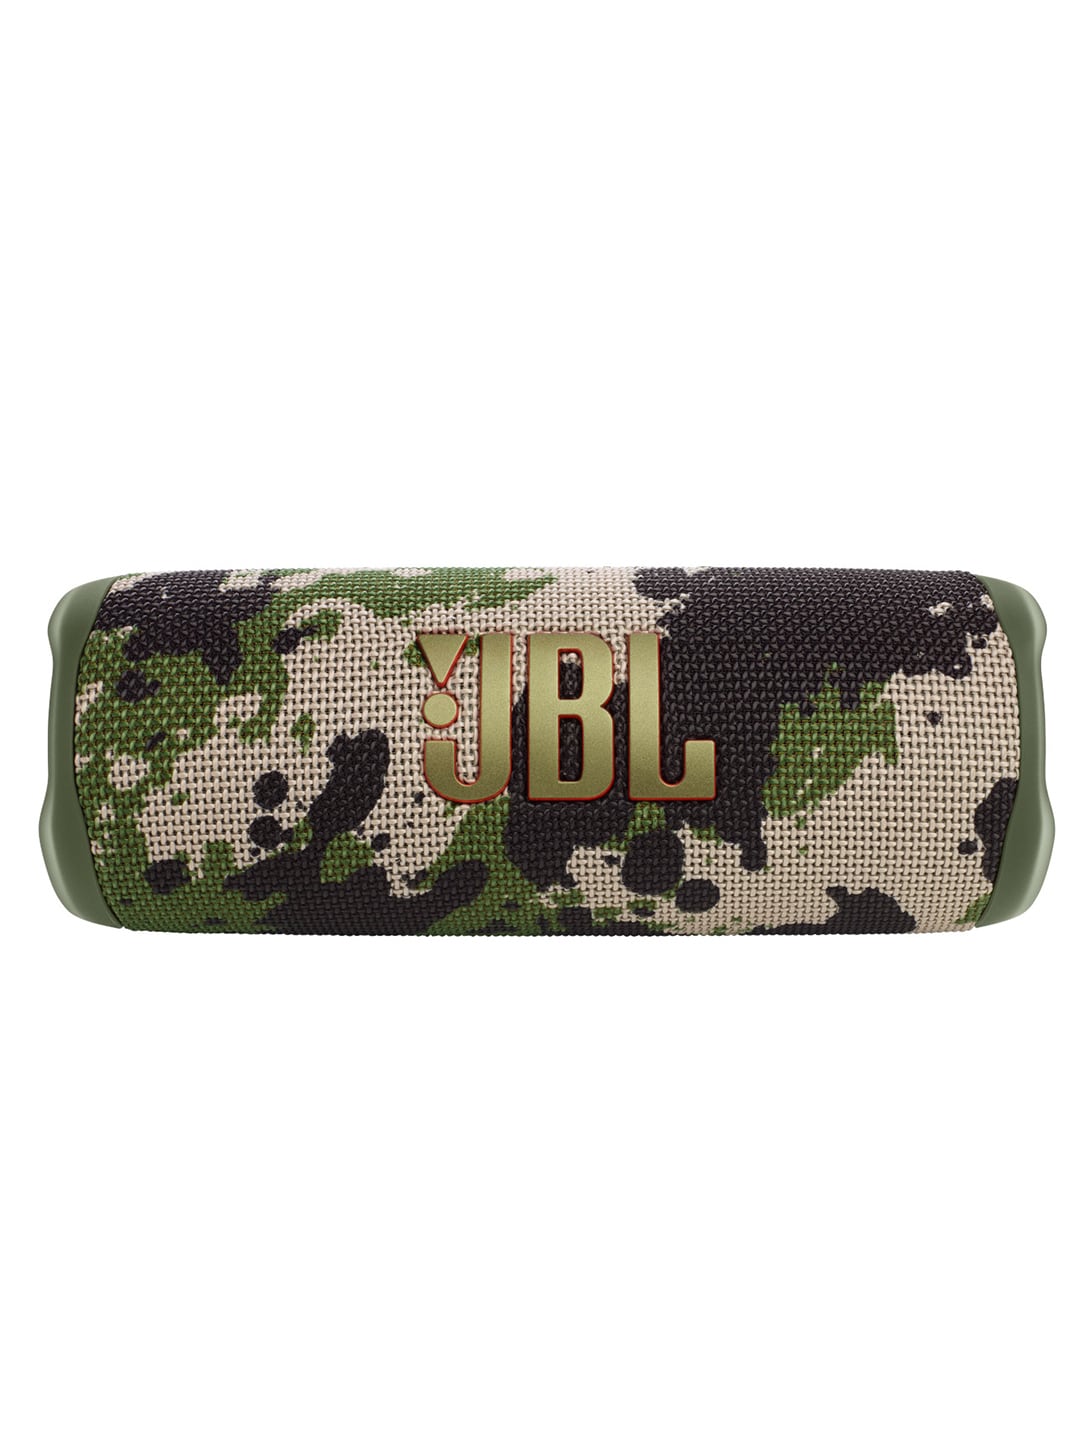 JBL Flip 6 Wireless Portable Bluetooth Speaker Without Mic - Olive Green Price in India